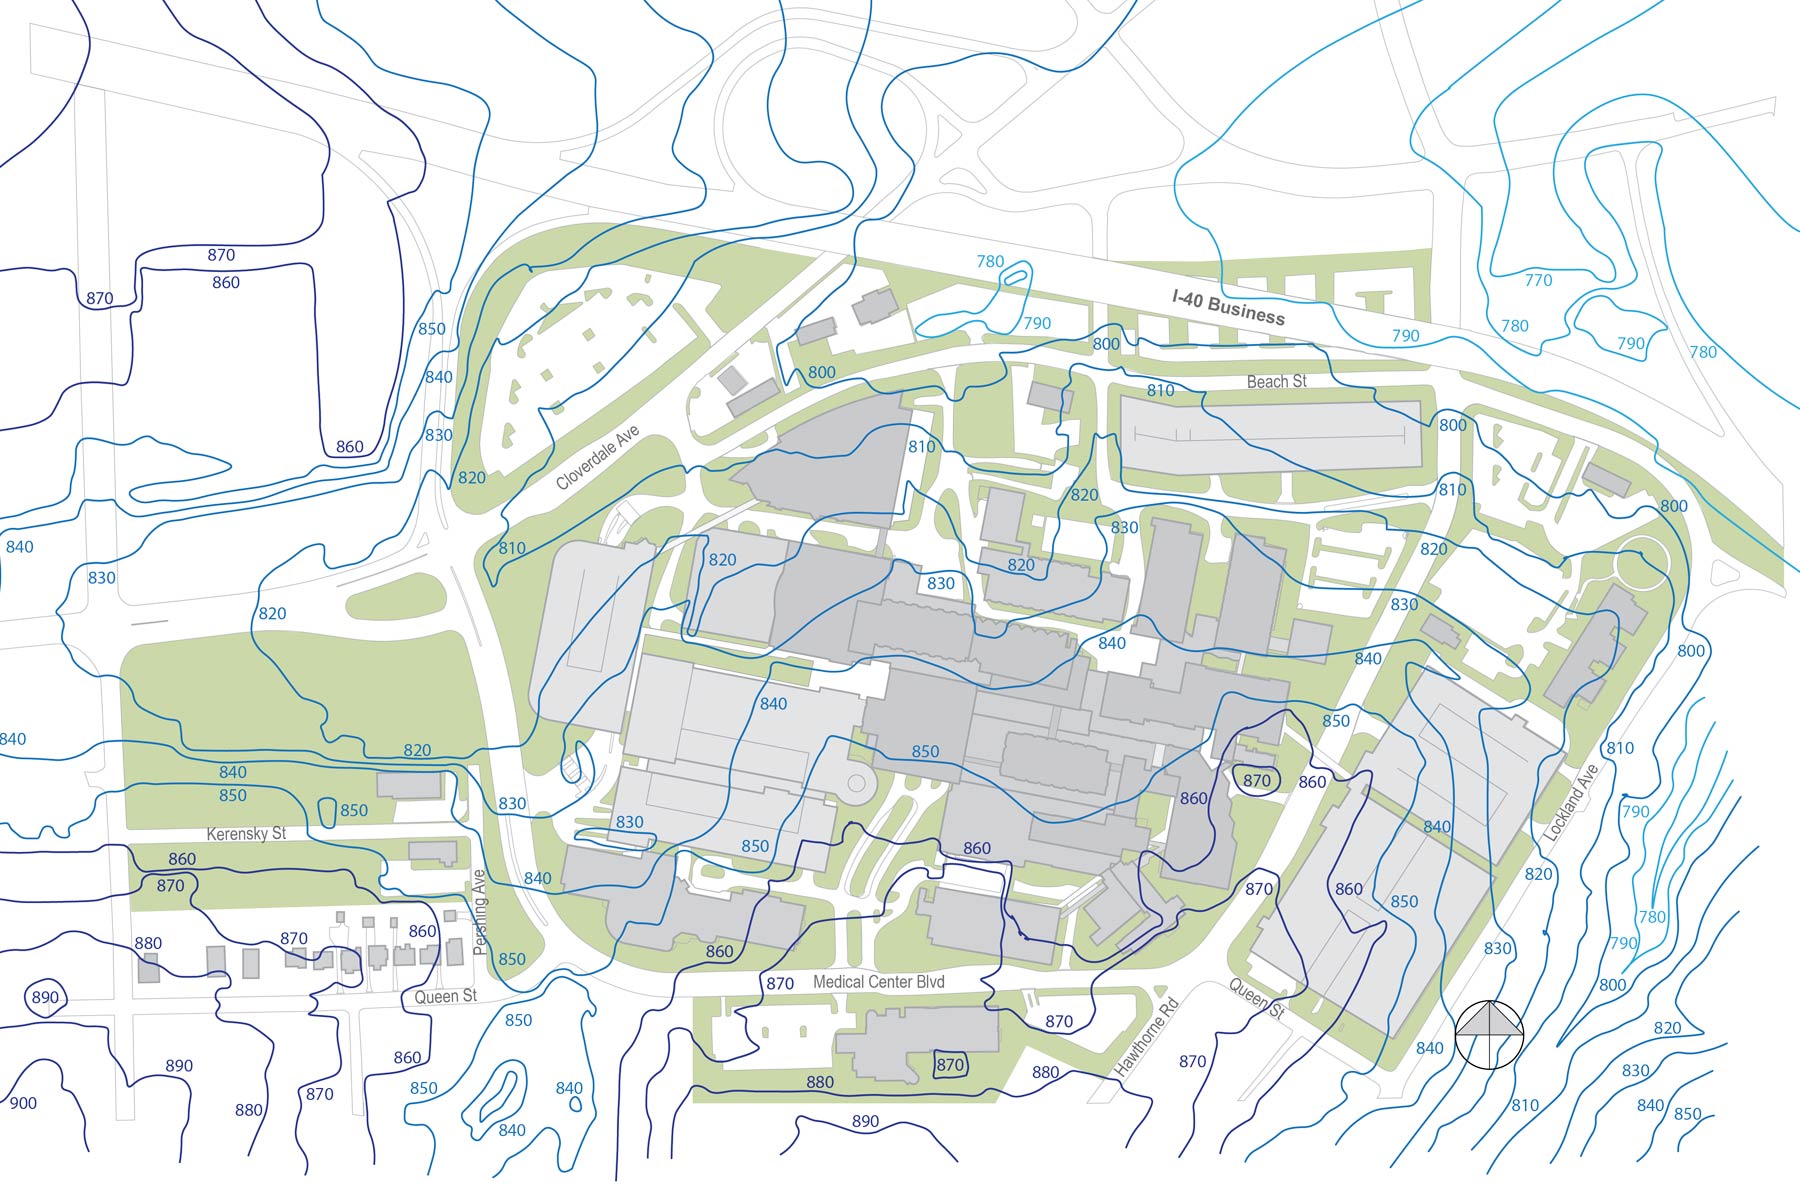 Wake Forest Baptist Medical Center - Master Site and Facilities Plan